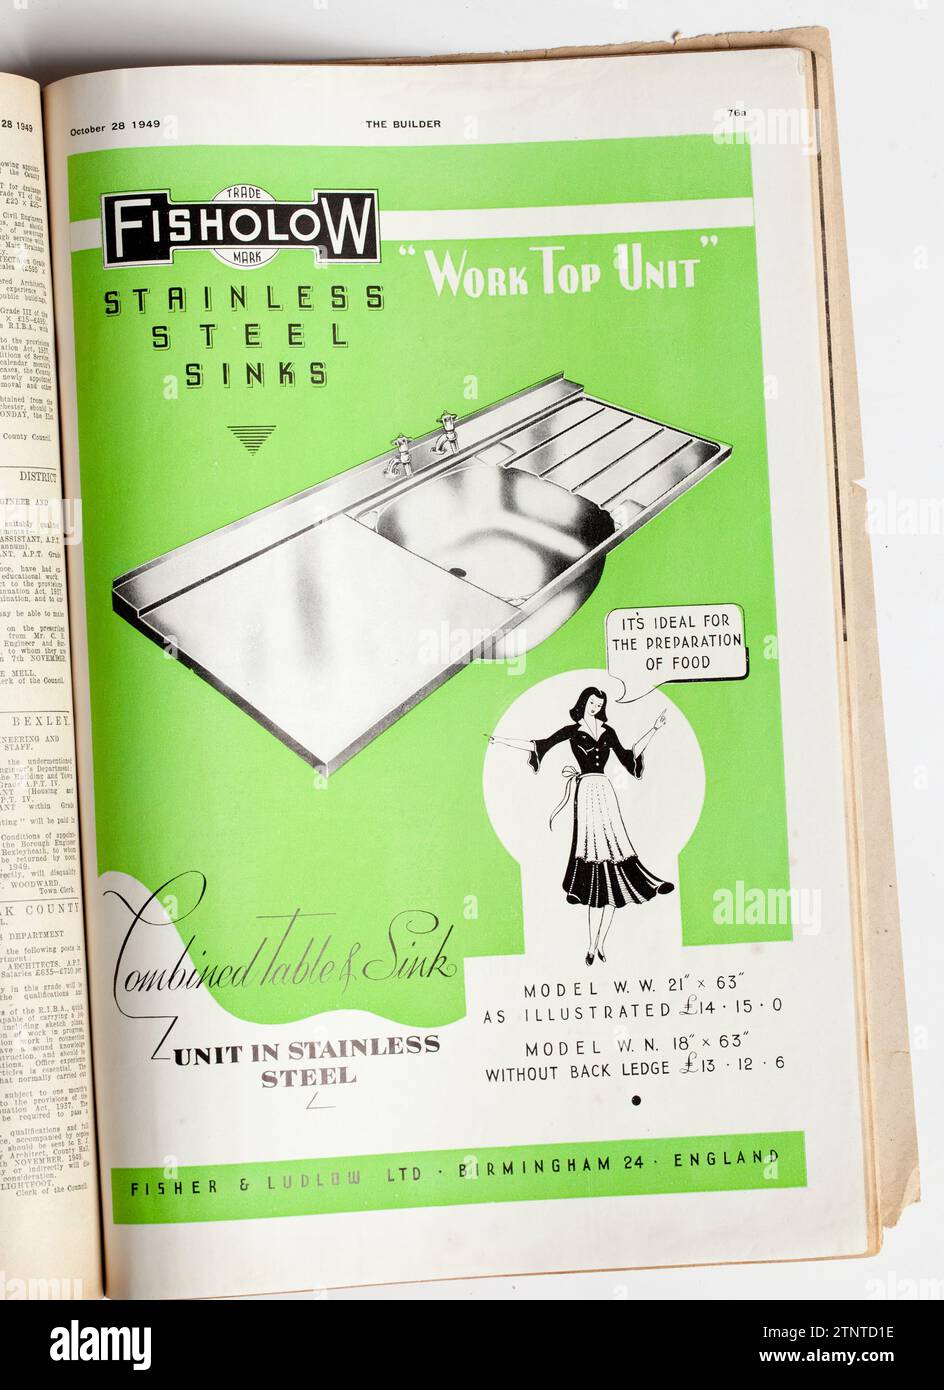 Advertising from a copy of 1940s The Builder Magazine ; Fisholow Stainless Steel Sinks Stock Photo